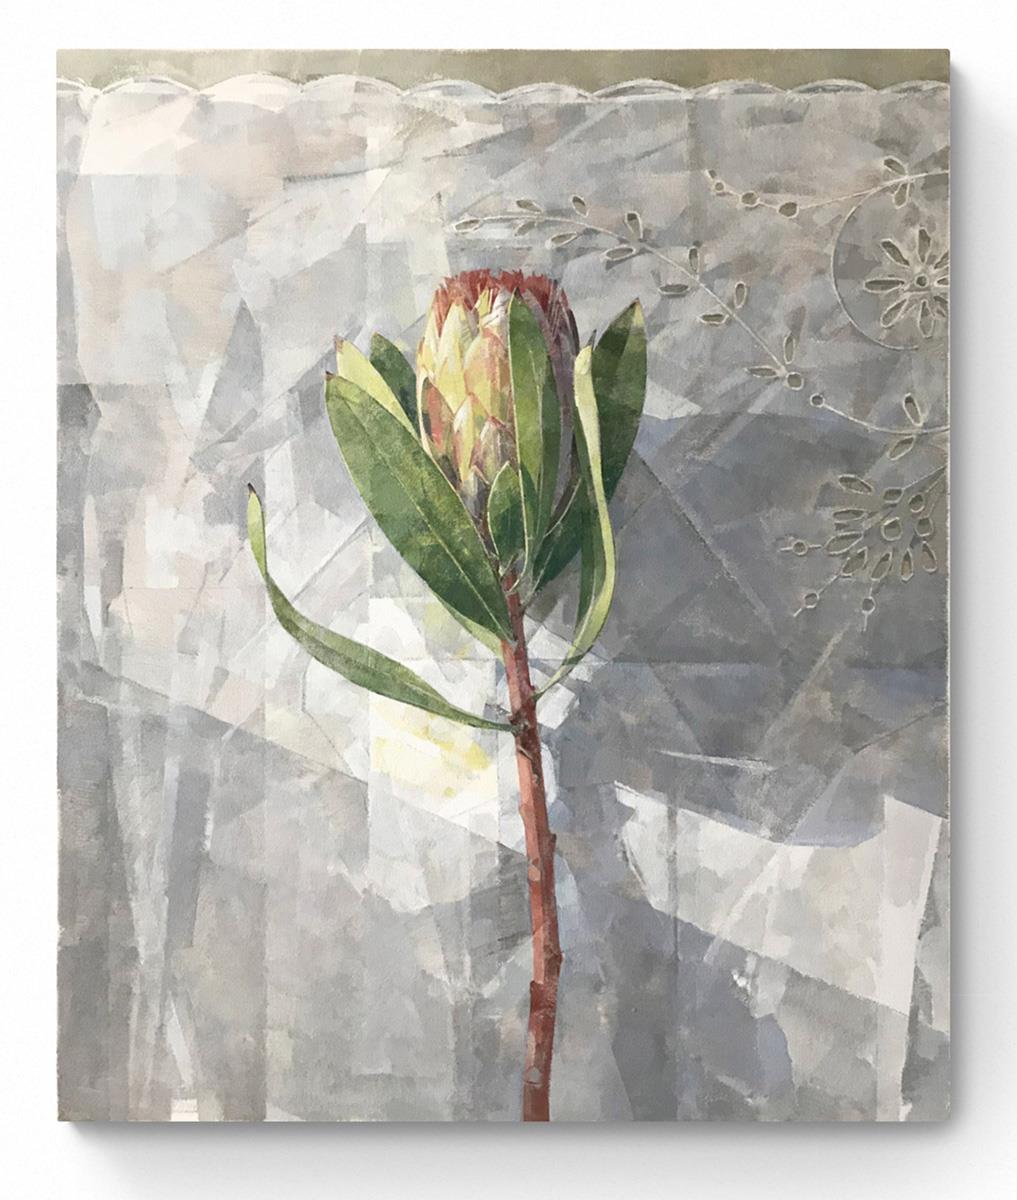 painting of a protea flower on a white tablecloth